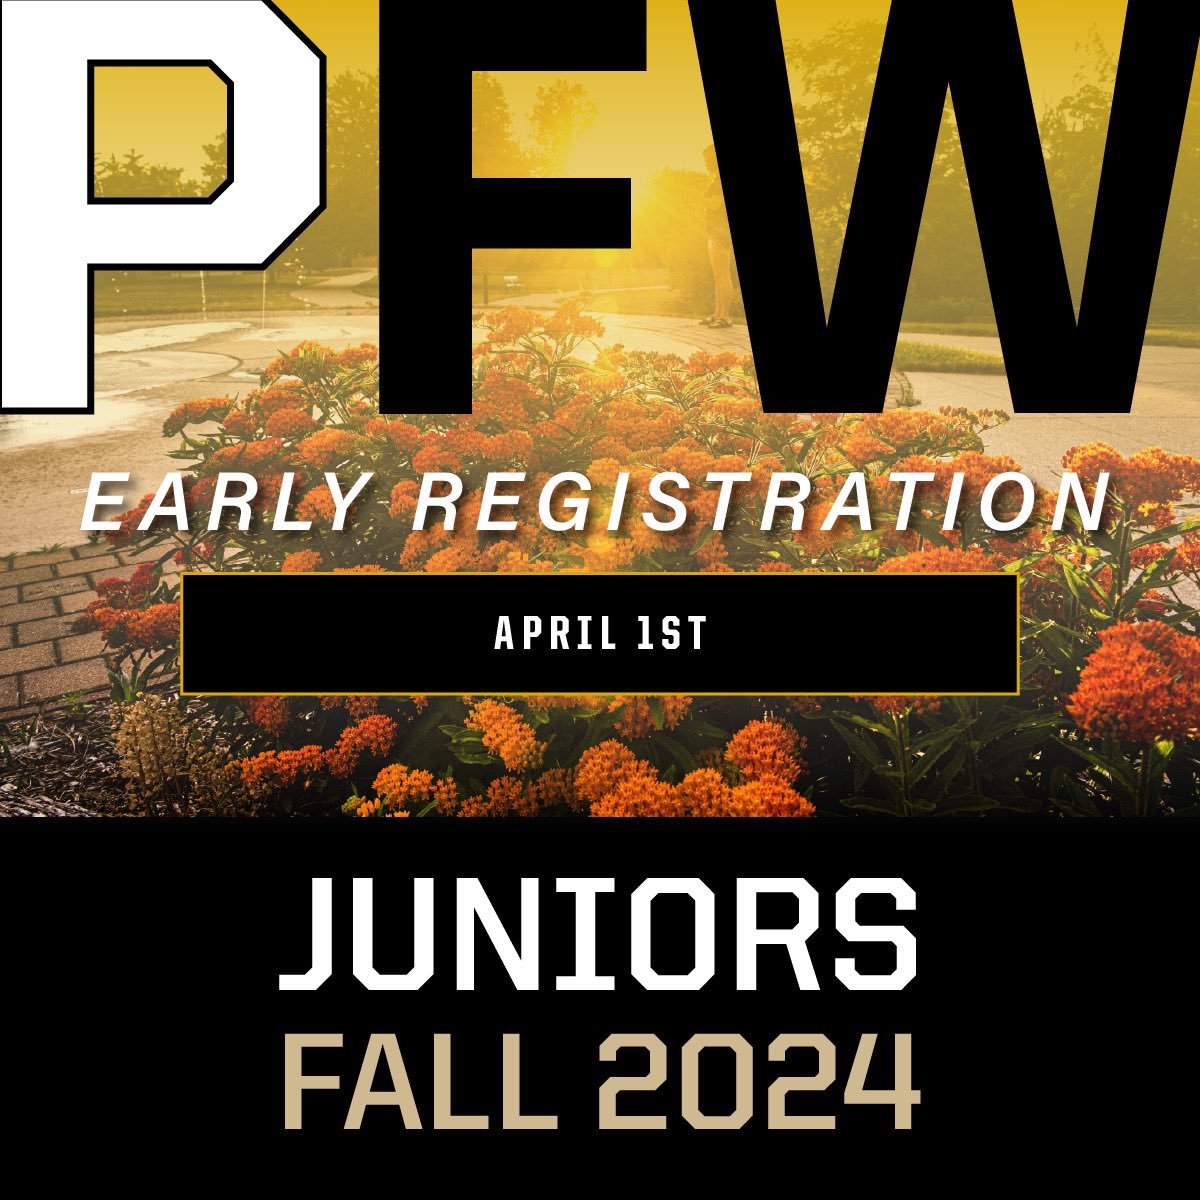 Fall registration begins for Juniors, Athletes, and Students with Disabilities. #FallRegistration #goDons